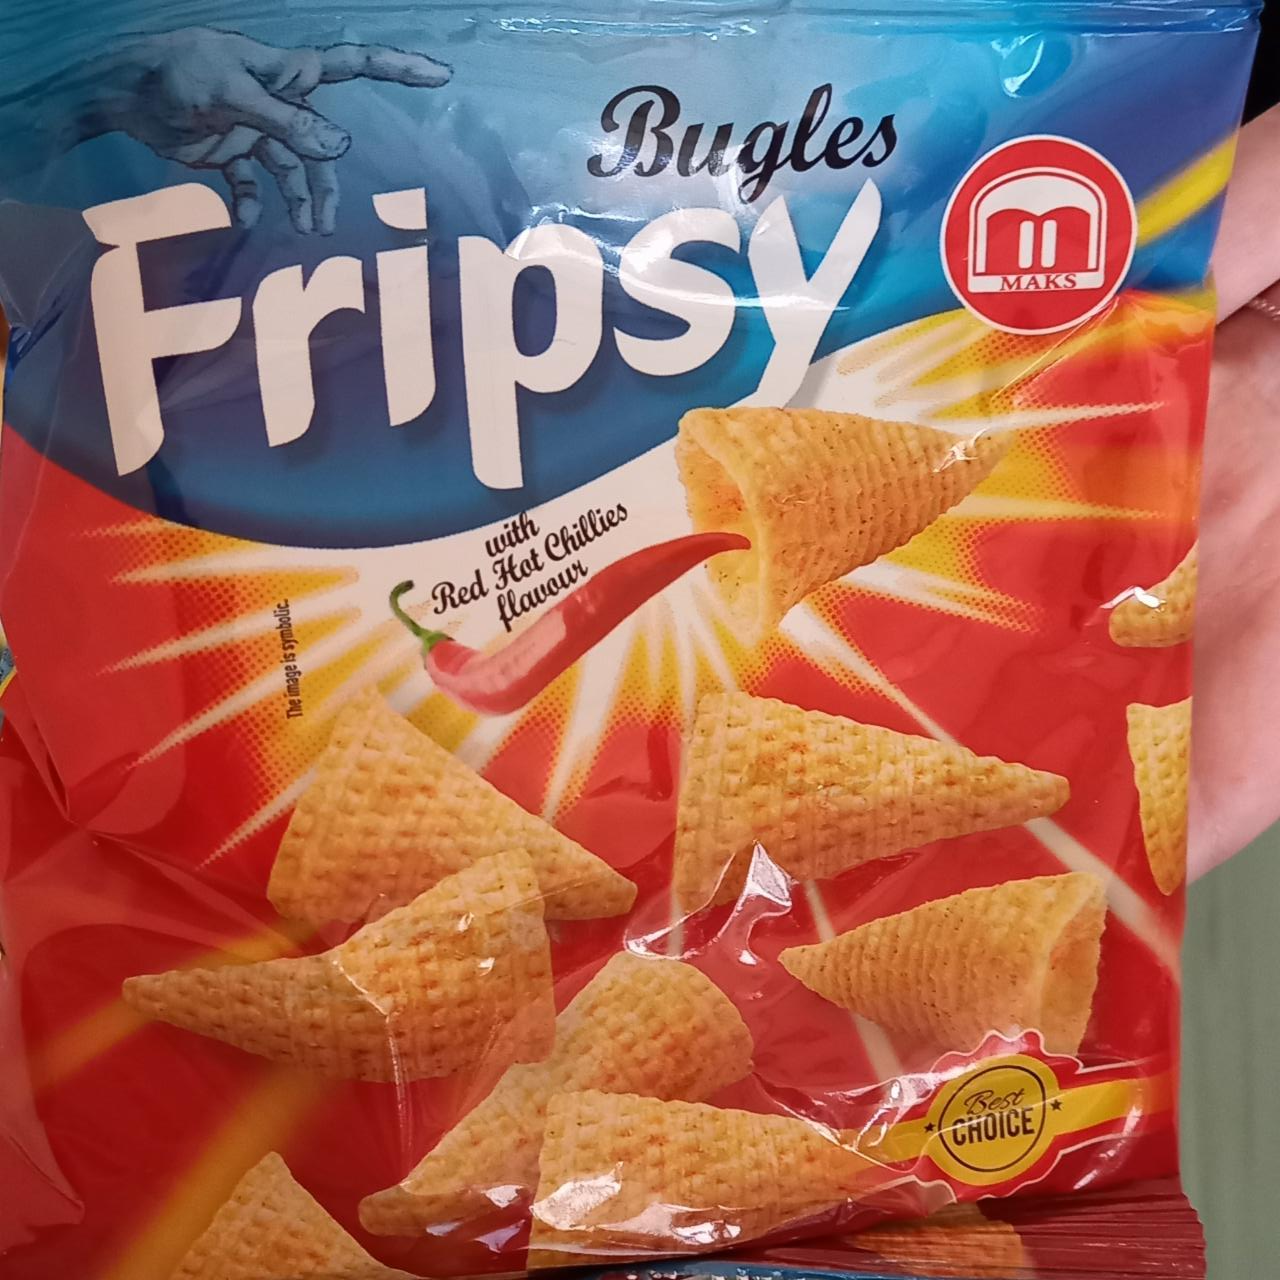 Fotografie - Bugles Fripsy with Red Hot Chillies Maks